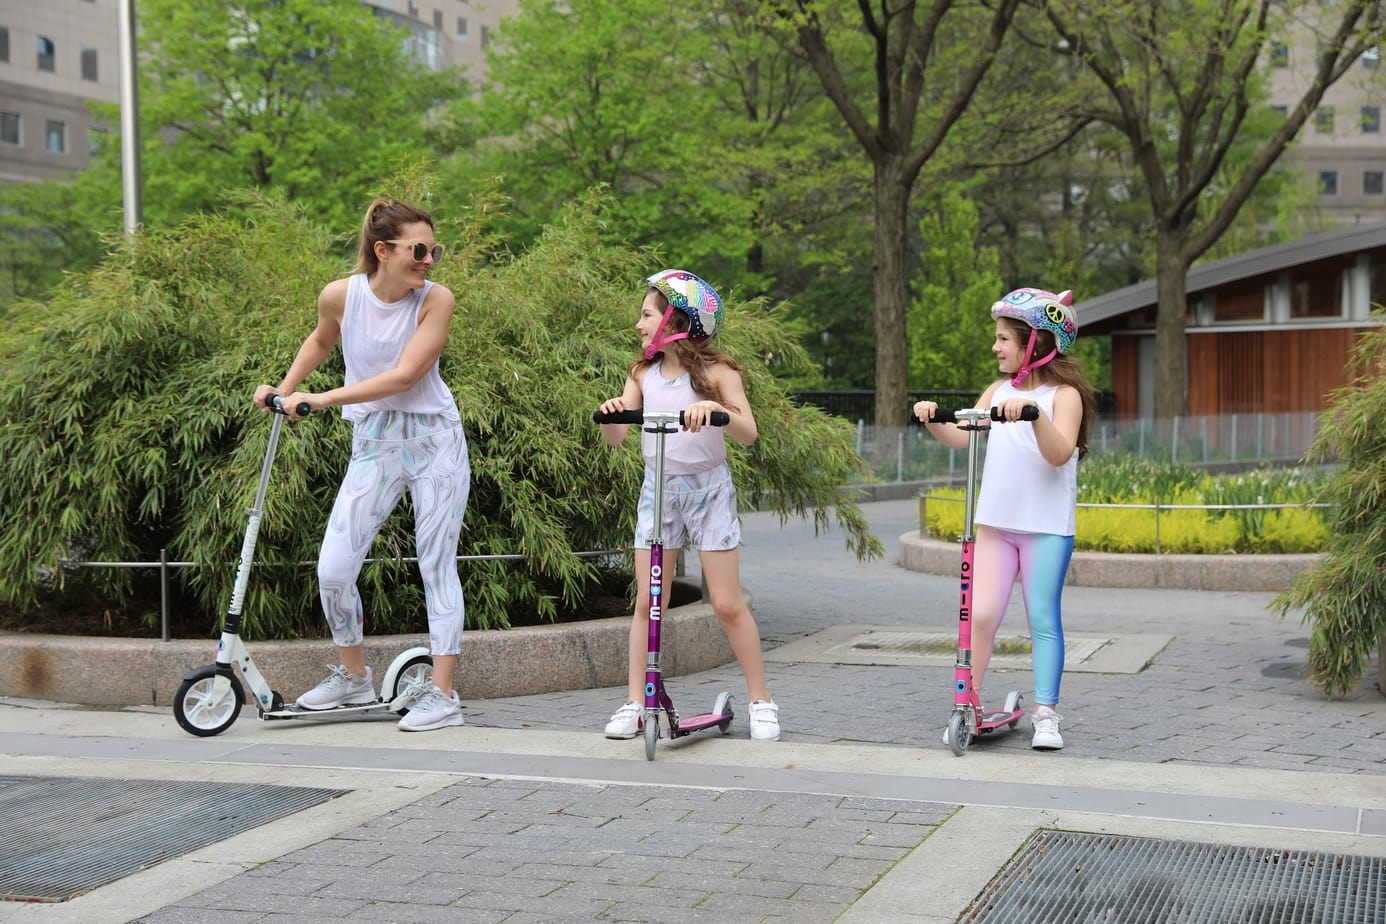 Activewear For Mothers And Daughters | Stroller In The City